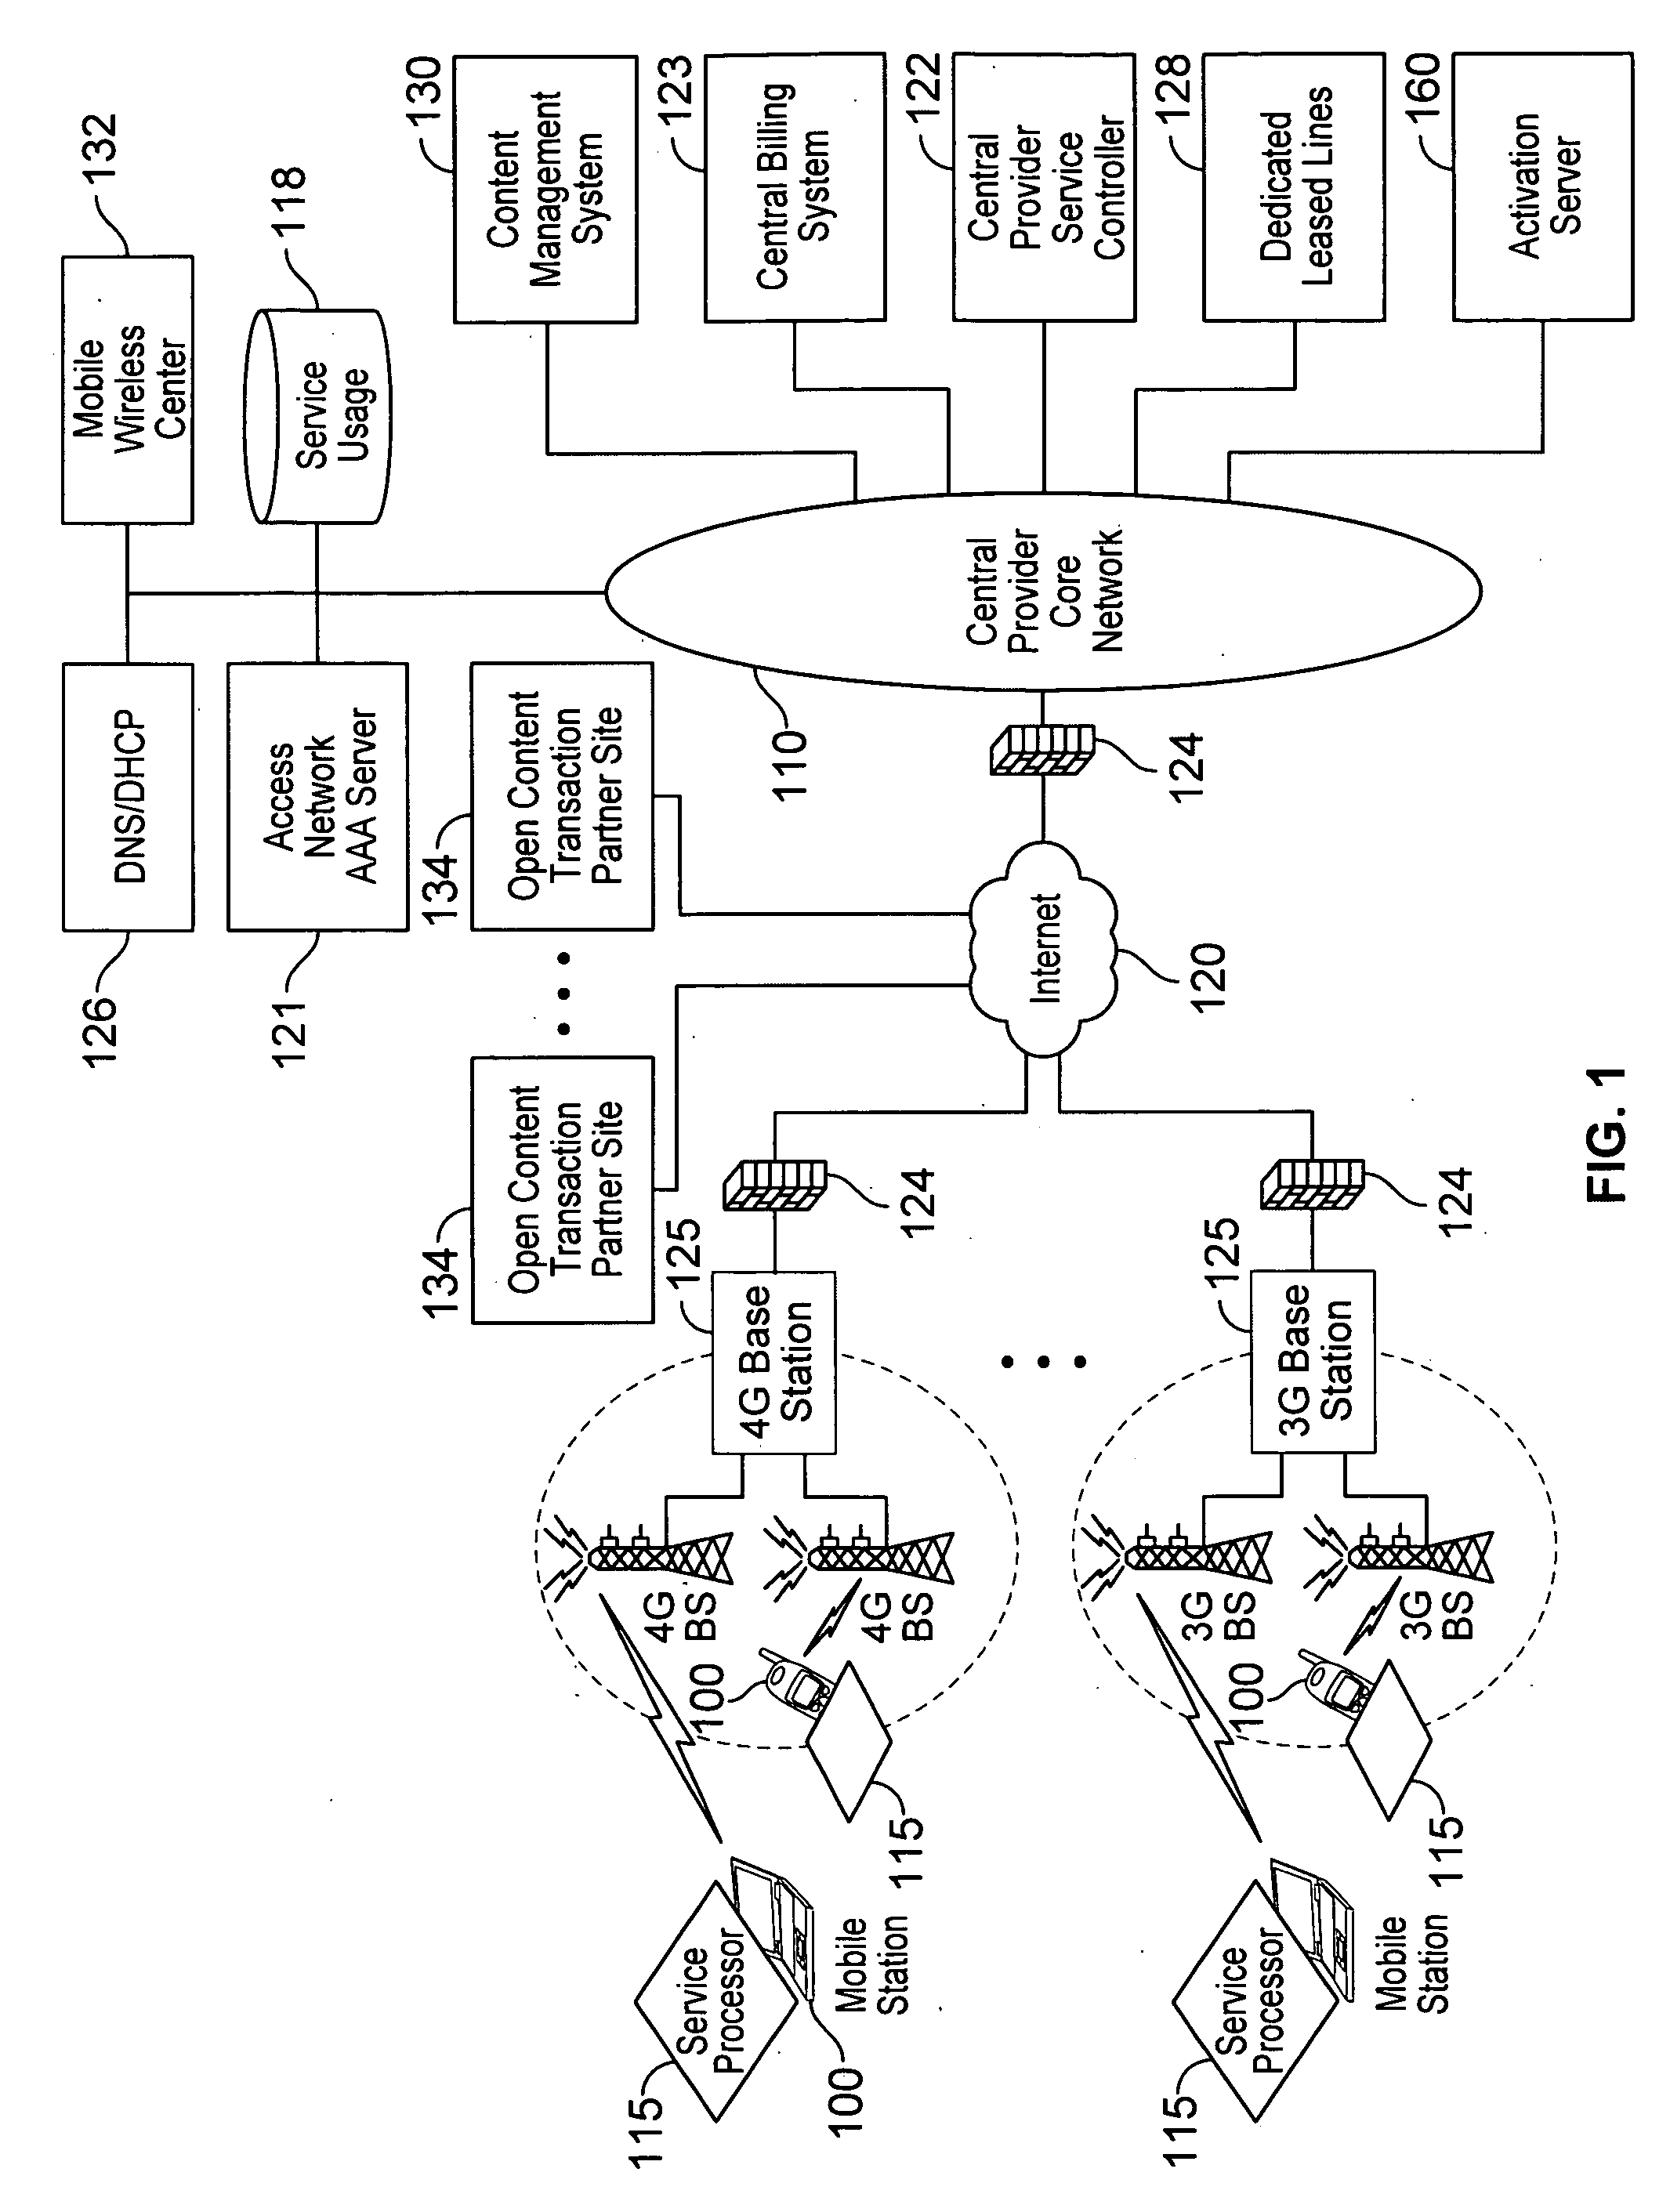 Verifiable device assisted service usage monitoring with reporting, synchronization, and notification